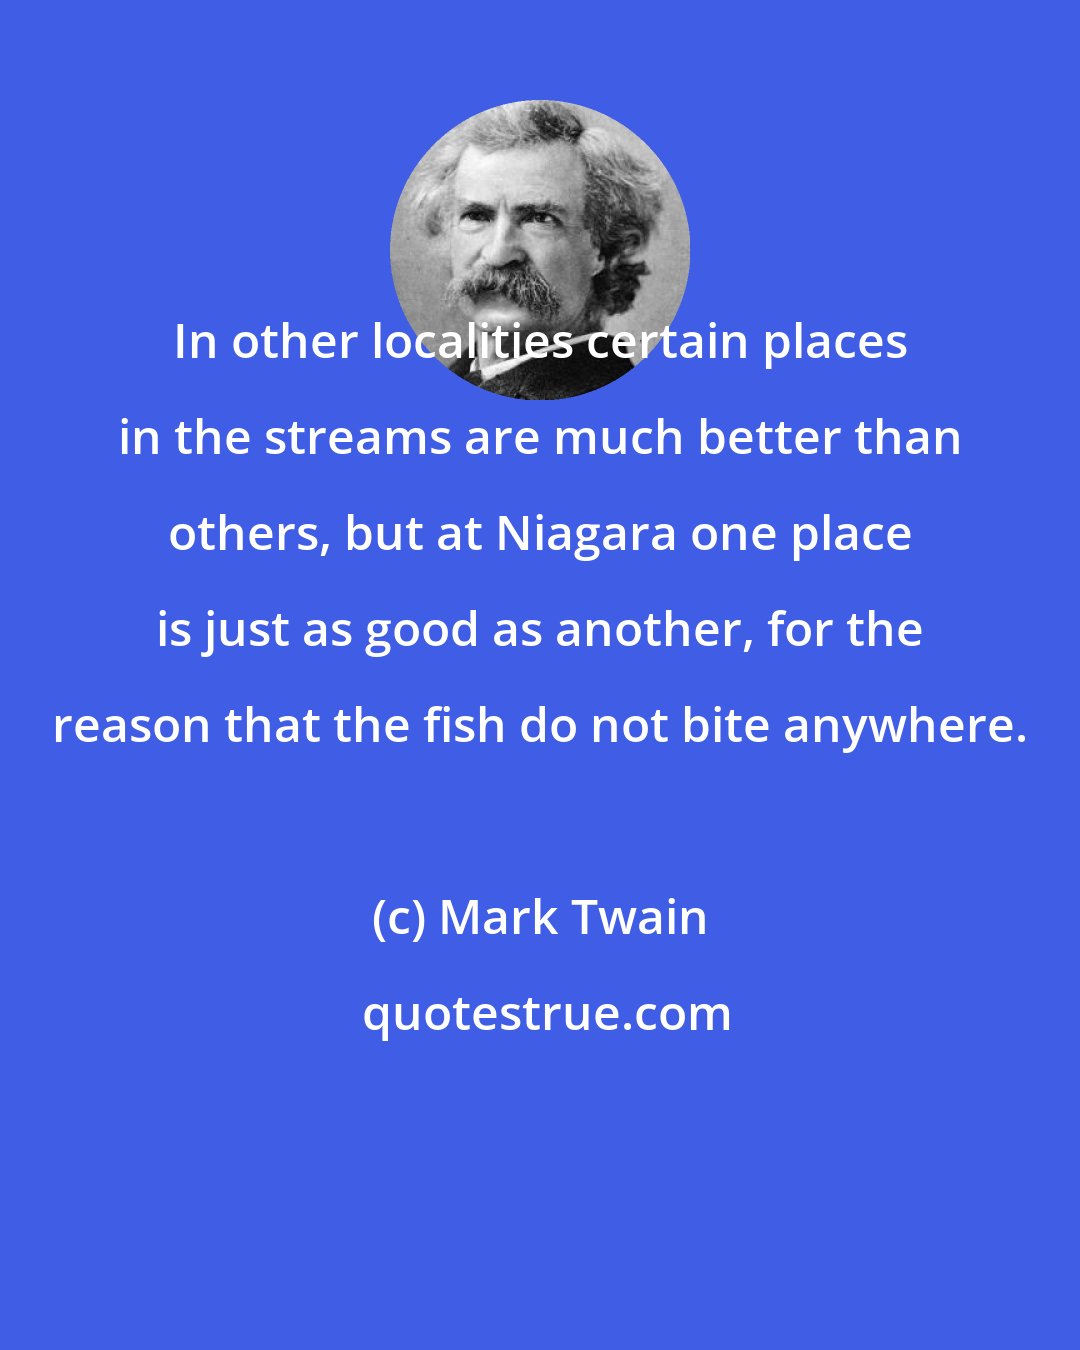 Mark Twain: In other localities certain places in the streams are much better than others, but at Niagara one place is just as good as another, for the reason that the fish do not bite anywhere.